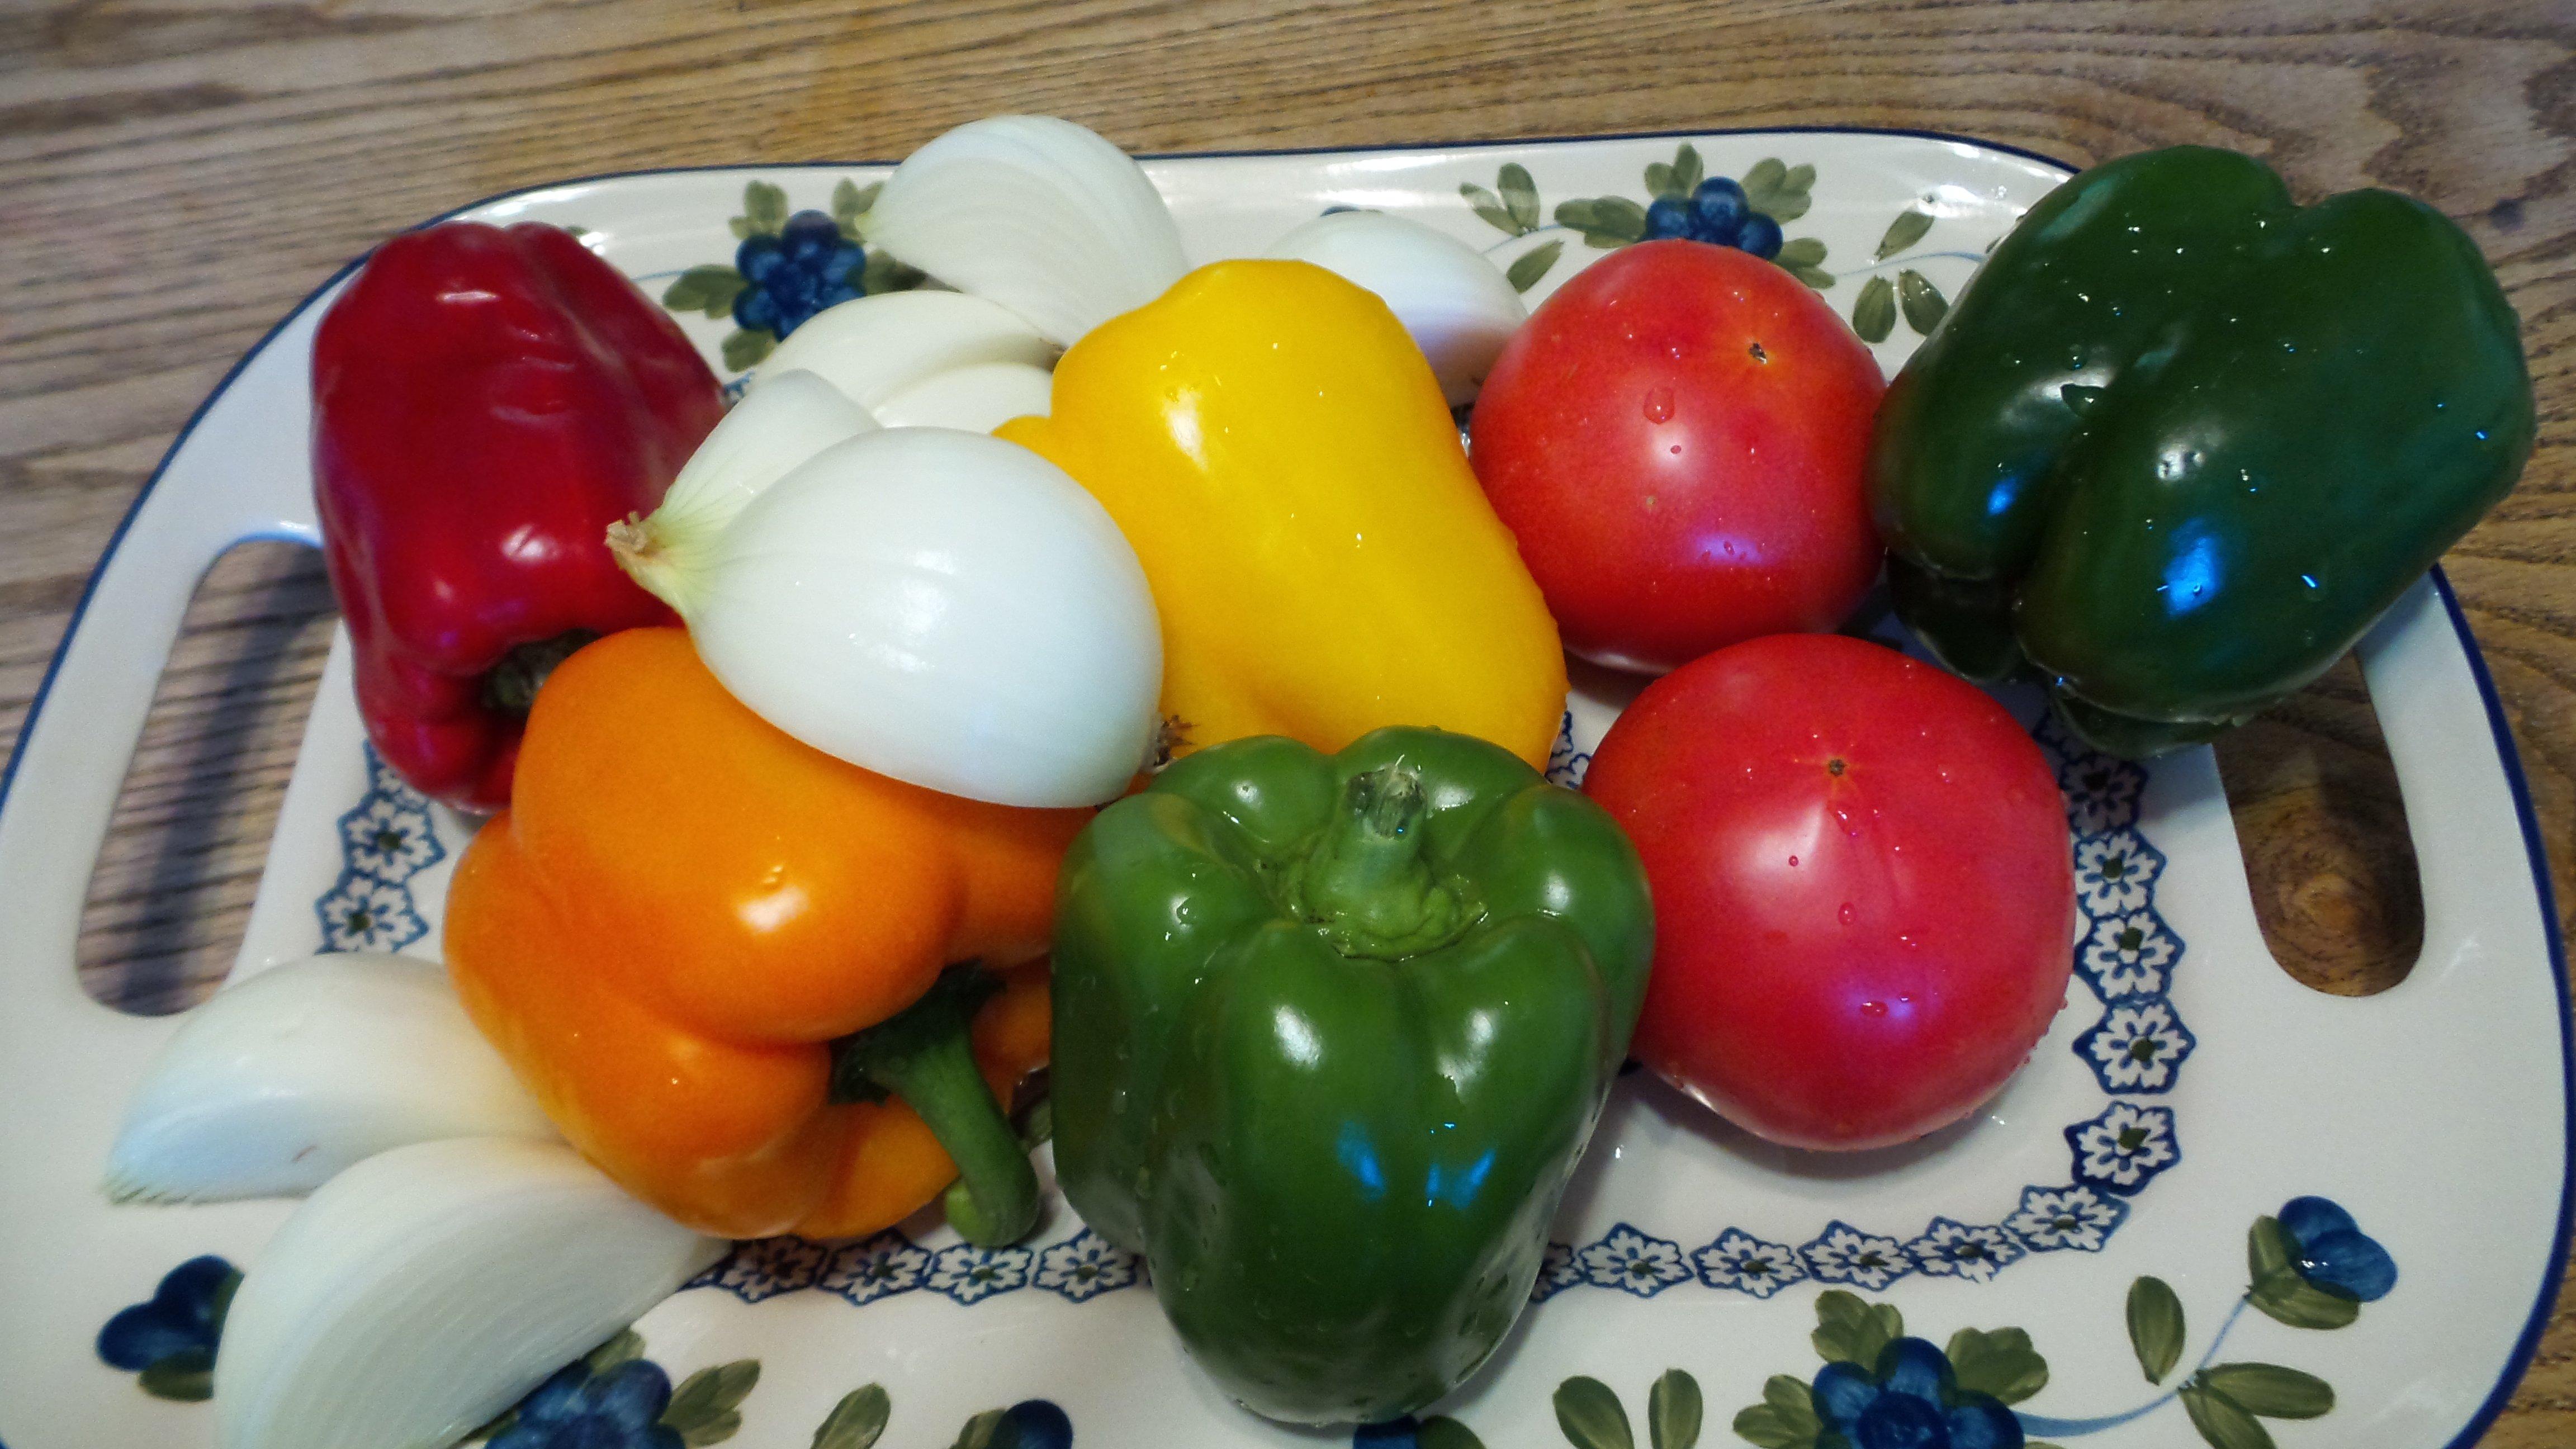 Fresh summer vegetables are abundant this time of year.